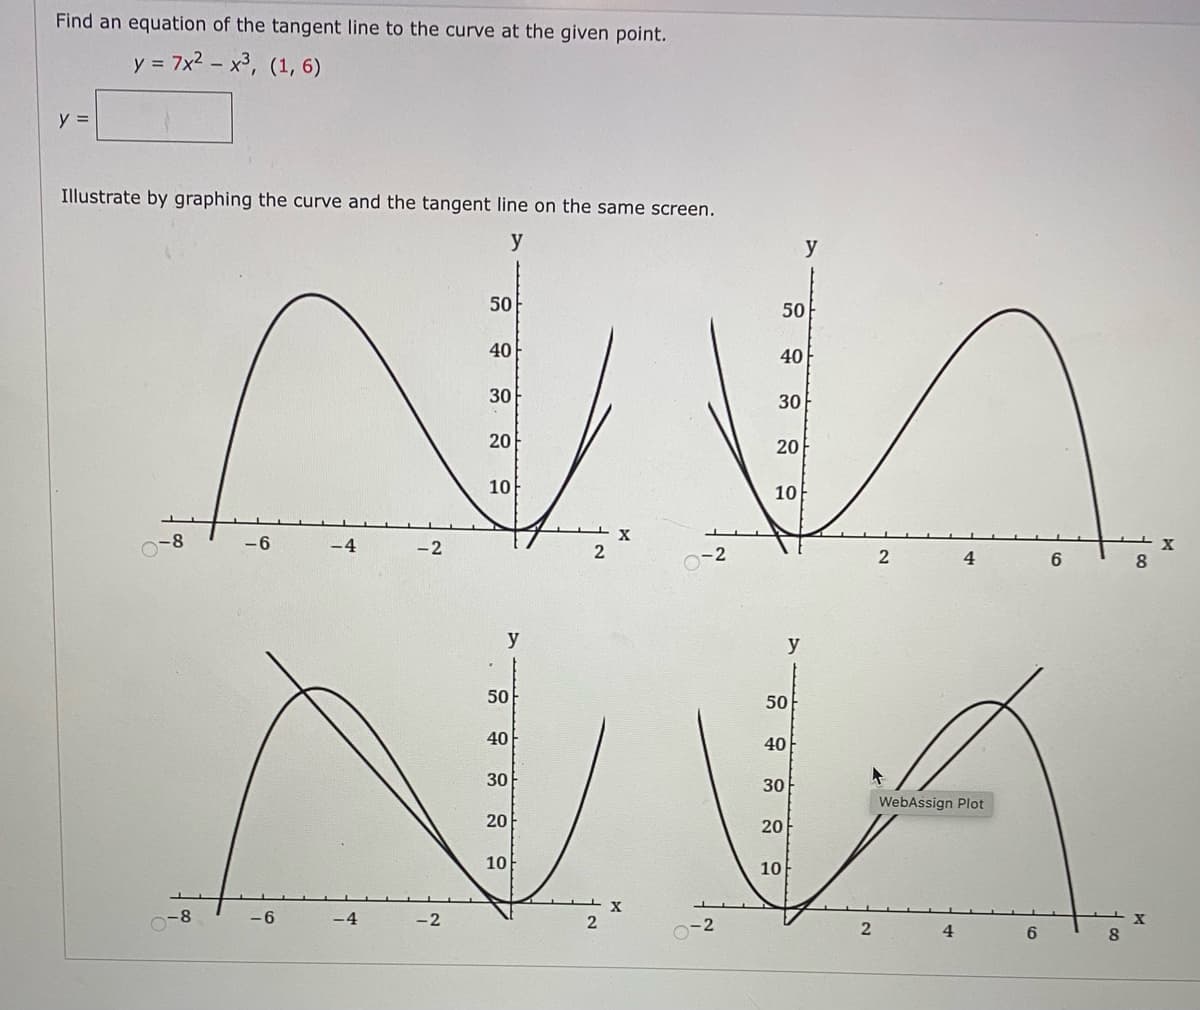 Find an equation of the tangent line to the curve at the given point.
y = 7x2 – x³, (1, 6)
y =
Illustrate by graphing the curve and the tangent line on the same screen.
y
y
50
50
40
40
30
30
20
20
10
10
-8
-6
-4
-2
2
-2
4.
6
8.
y
y
50
50
40
40
30
30
WebAssign Plot
20
20
10
10
-8
-6
2
2
2
4.
8
